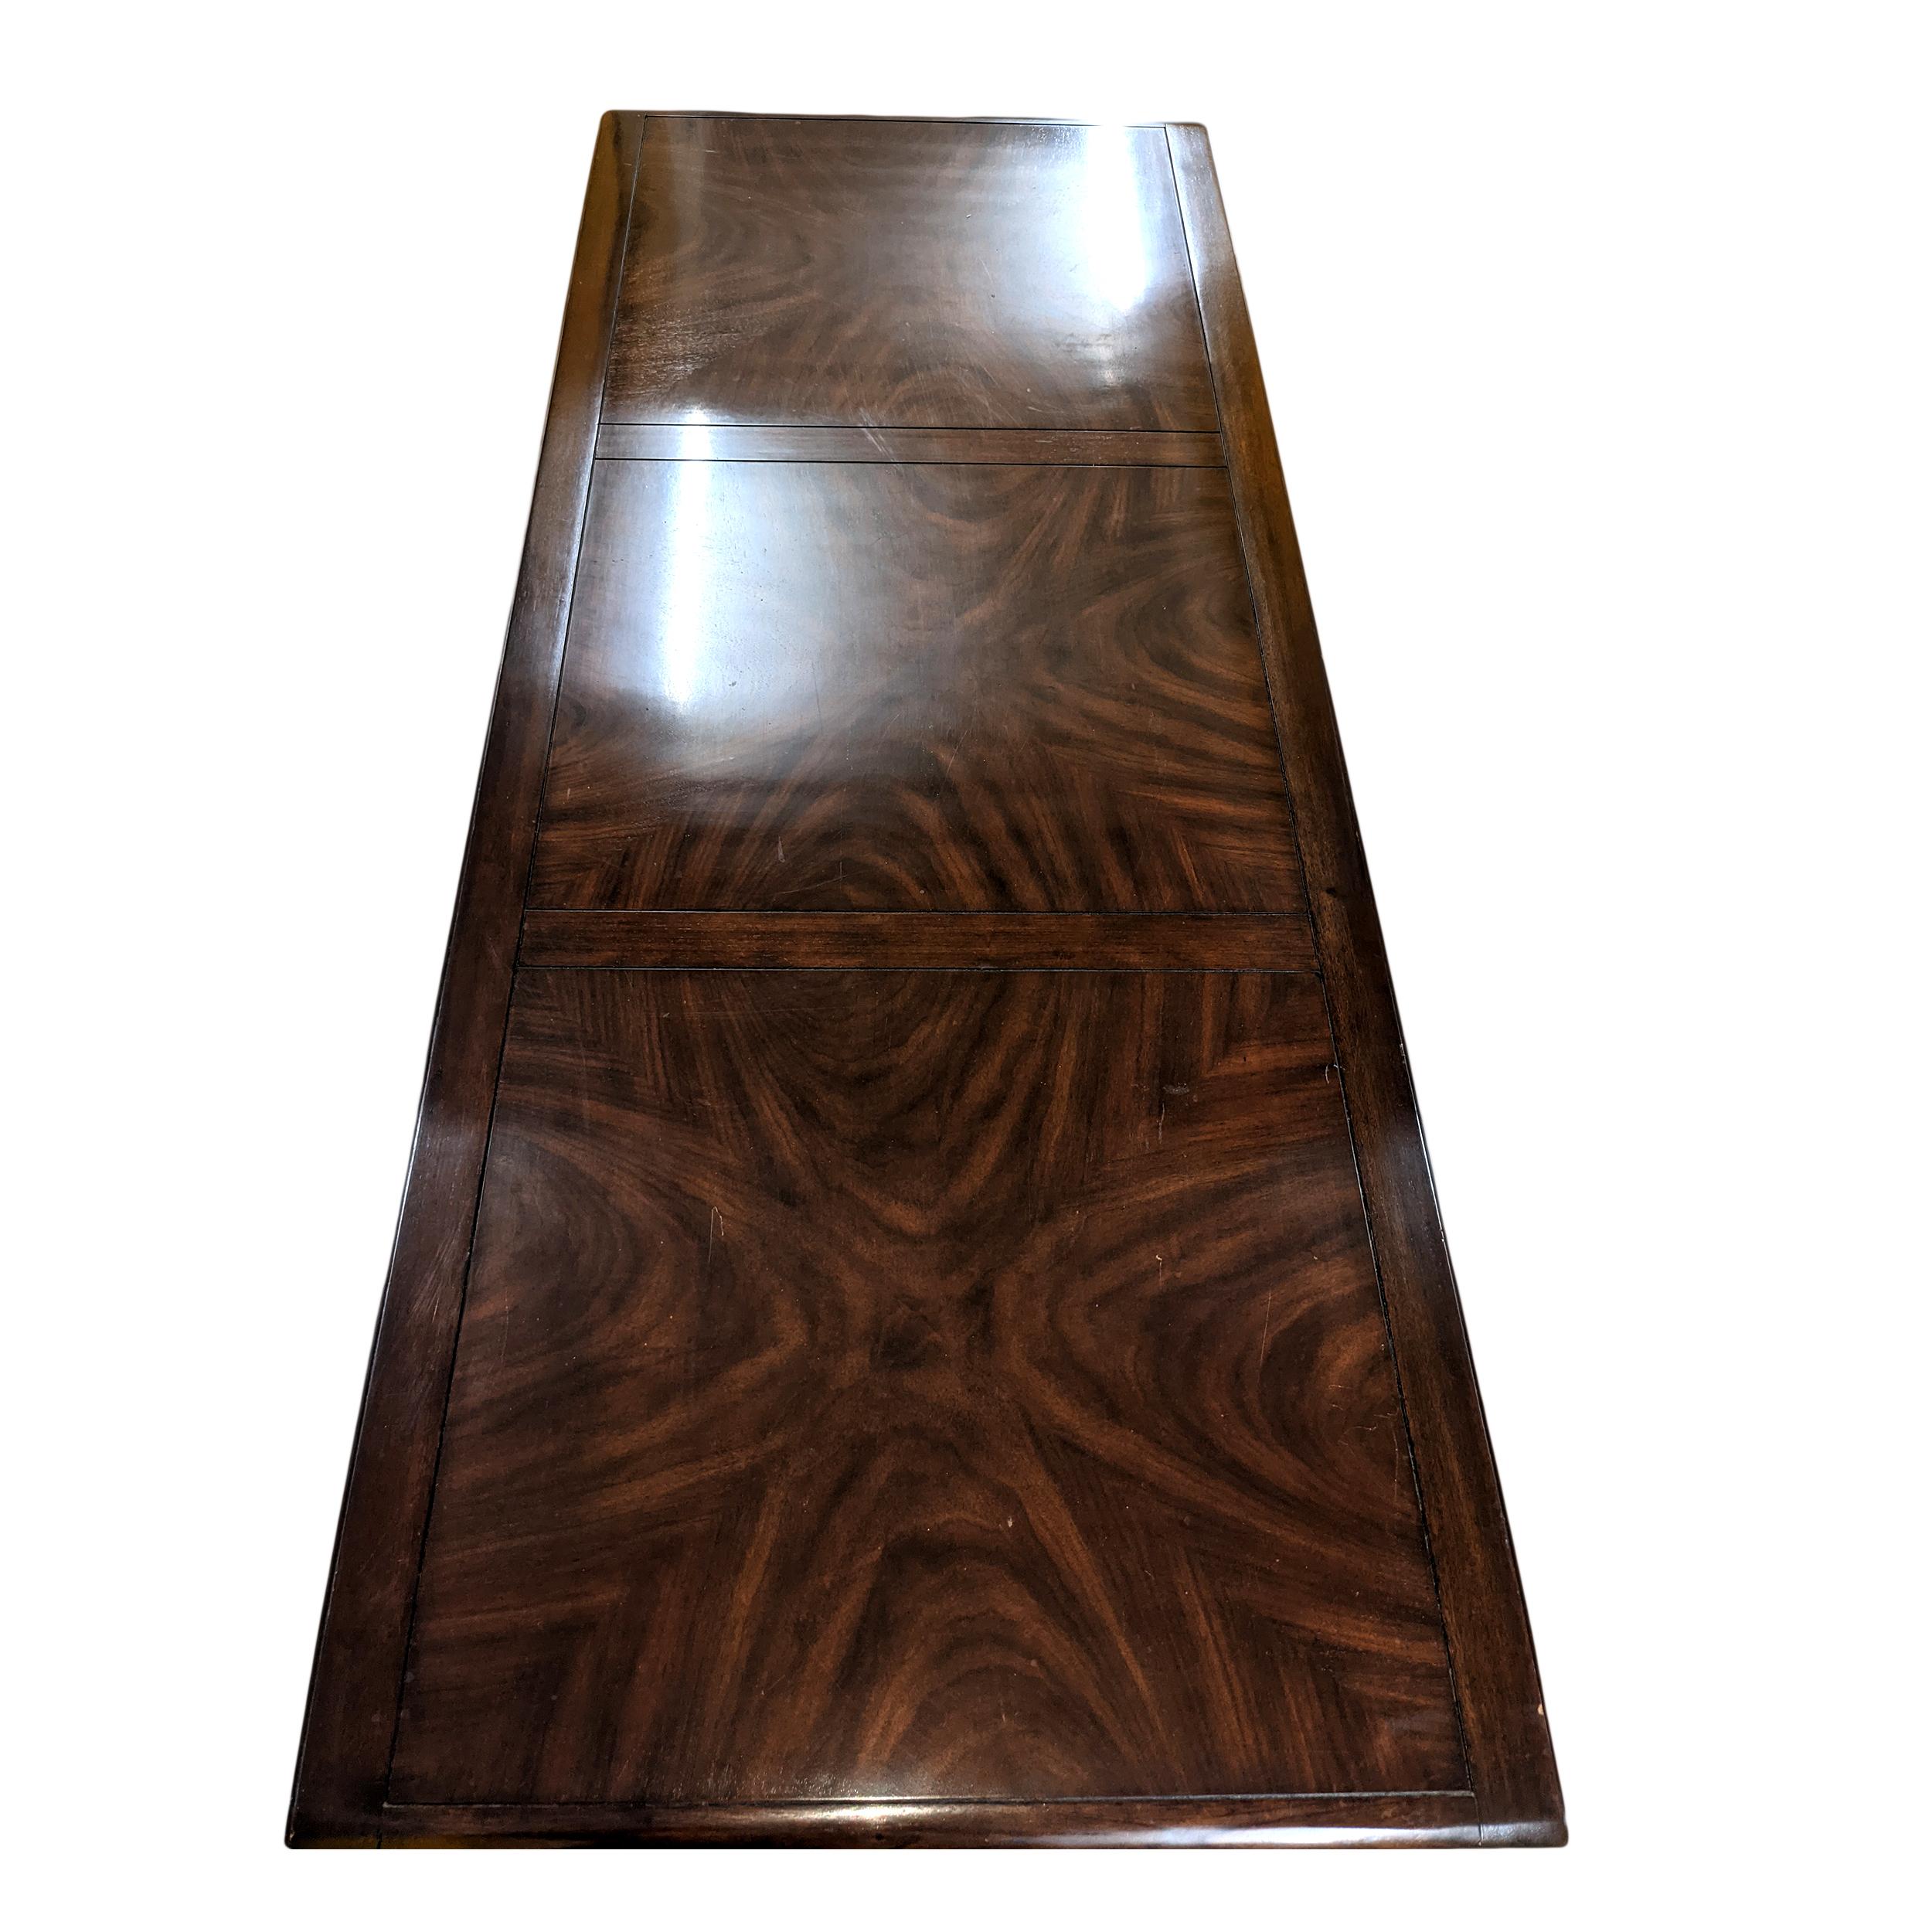 20th Century Chin Hua Waterfall Coffee Table with Fretwork Details